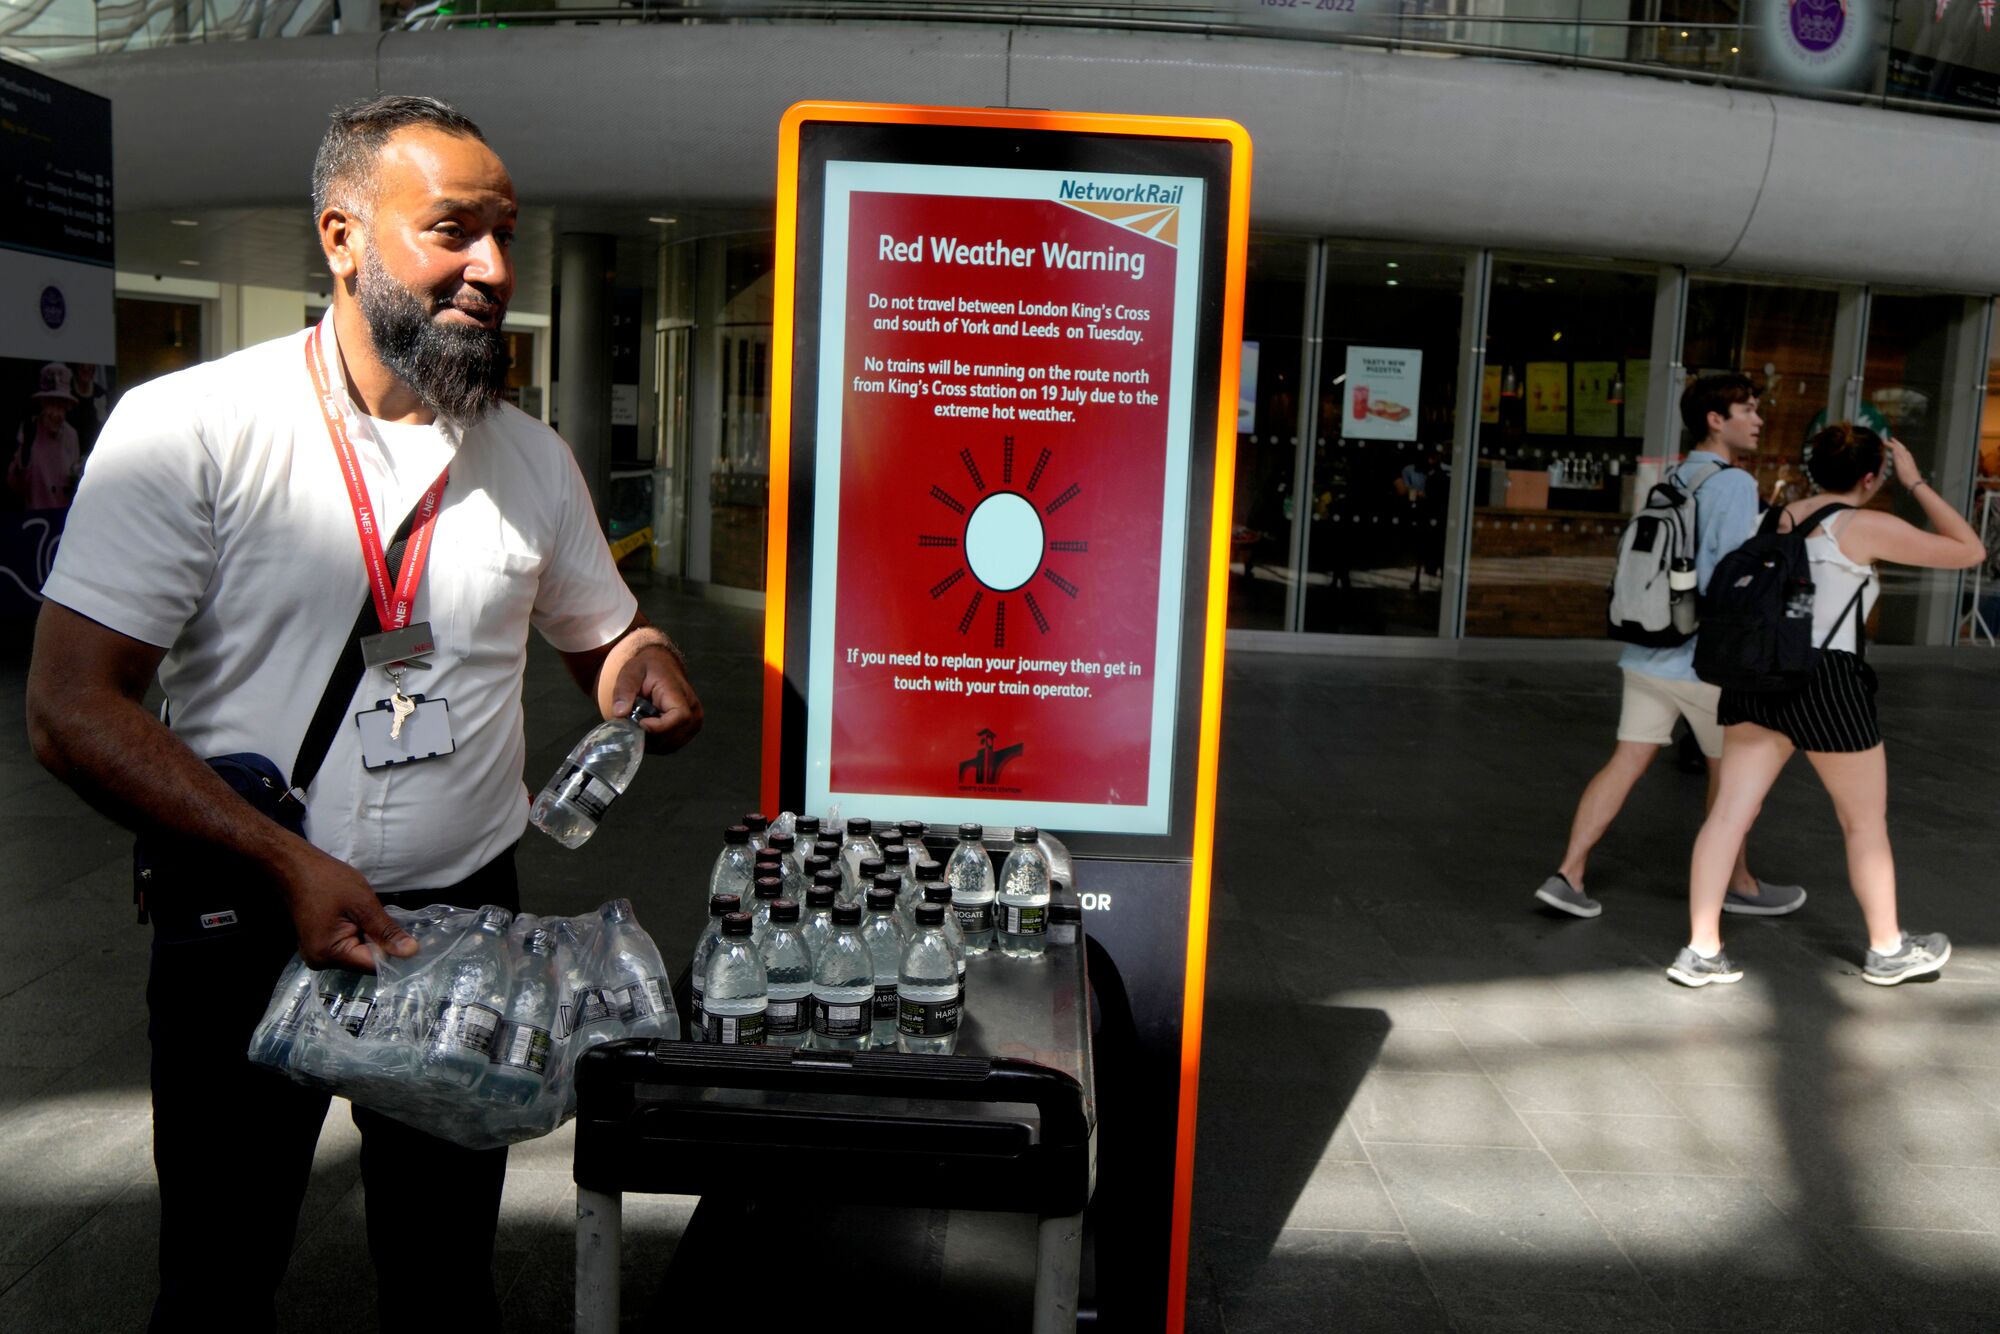 A railway worker hands out bottles of water to passengers at King's Cross railway station in London, where there were train cancellations due to the heat on July 19, 2022.